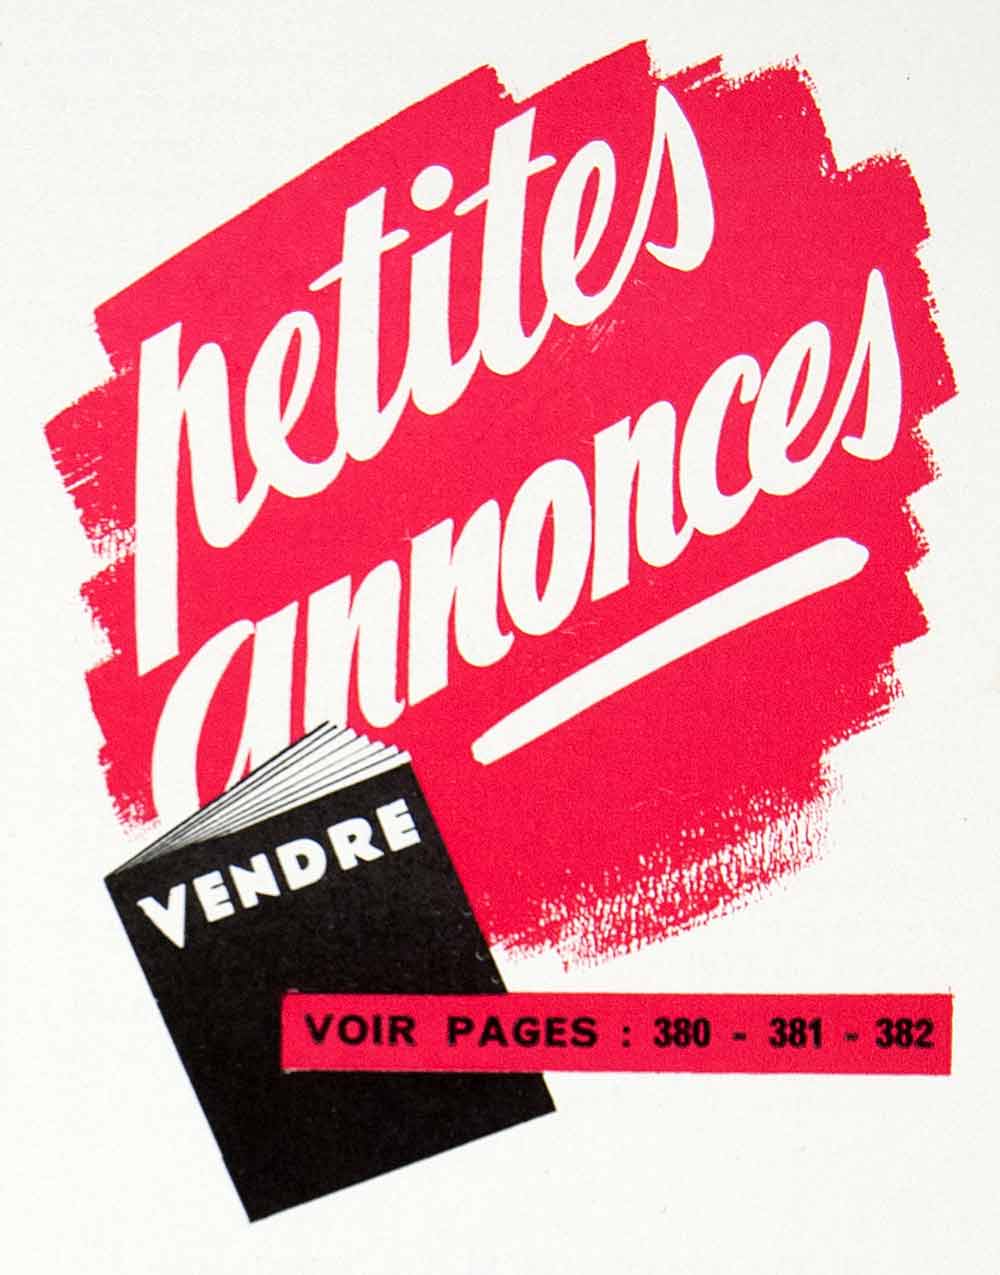 1956 Ad Vendres Petits Annonces Advertising Red French Advertisements VEN6